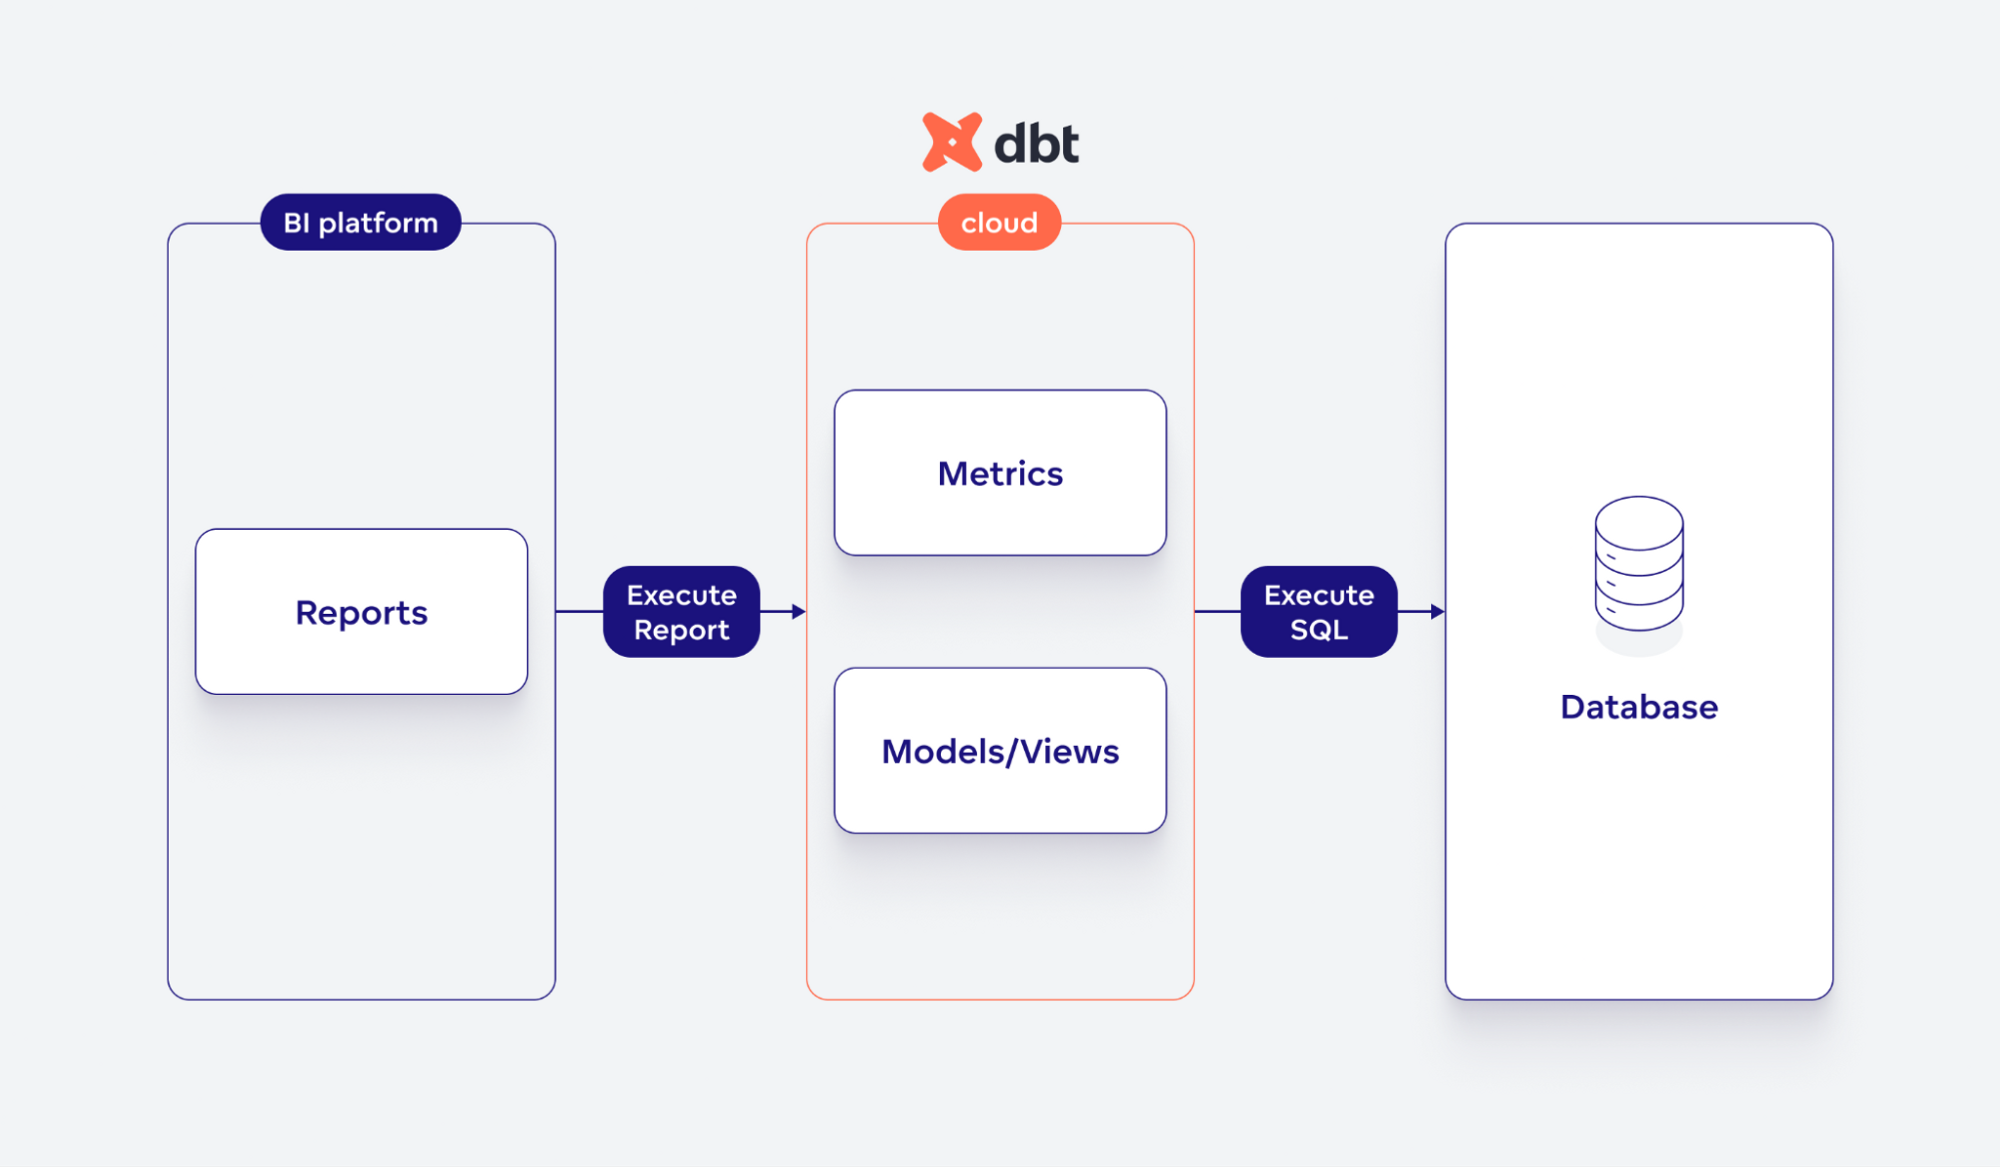 BI platform does not contain any semantic layer and does not generate SQL from metrics. It fully integrates with dbt Cloud APIs, which can generate SQL from metrics (in context), execute SQL, and cache results.